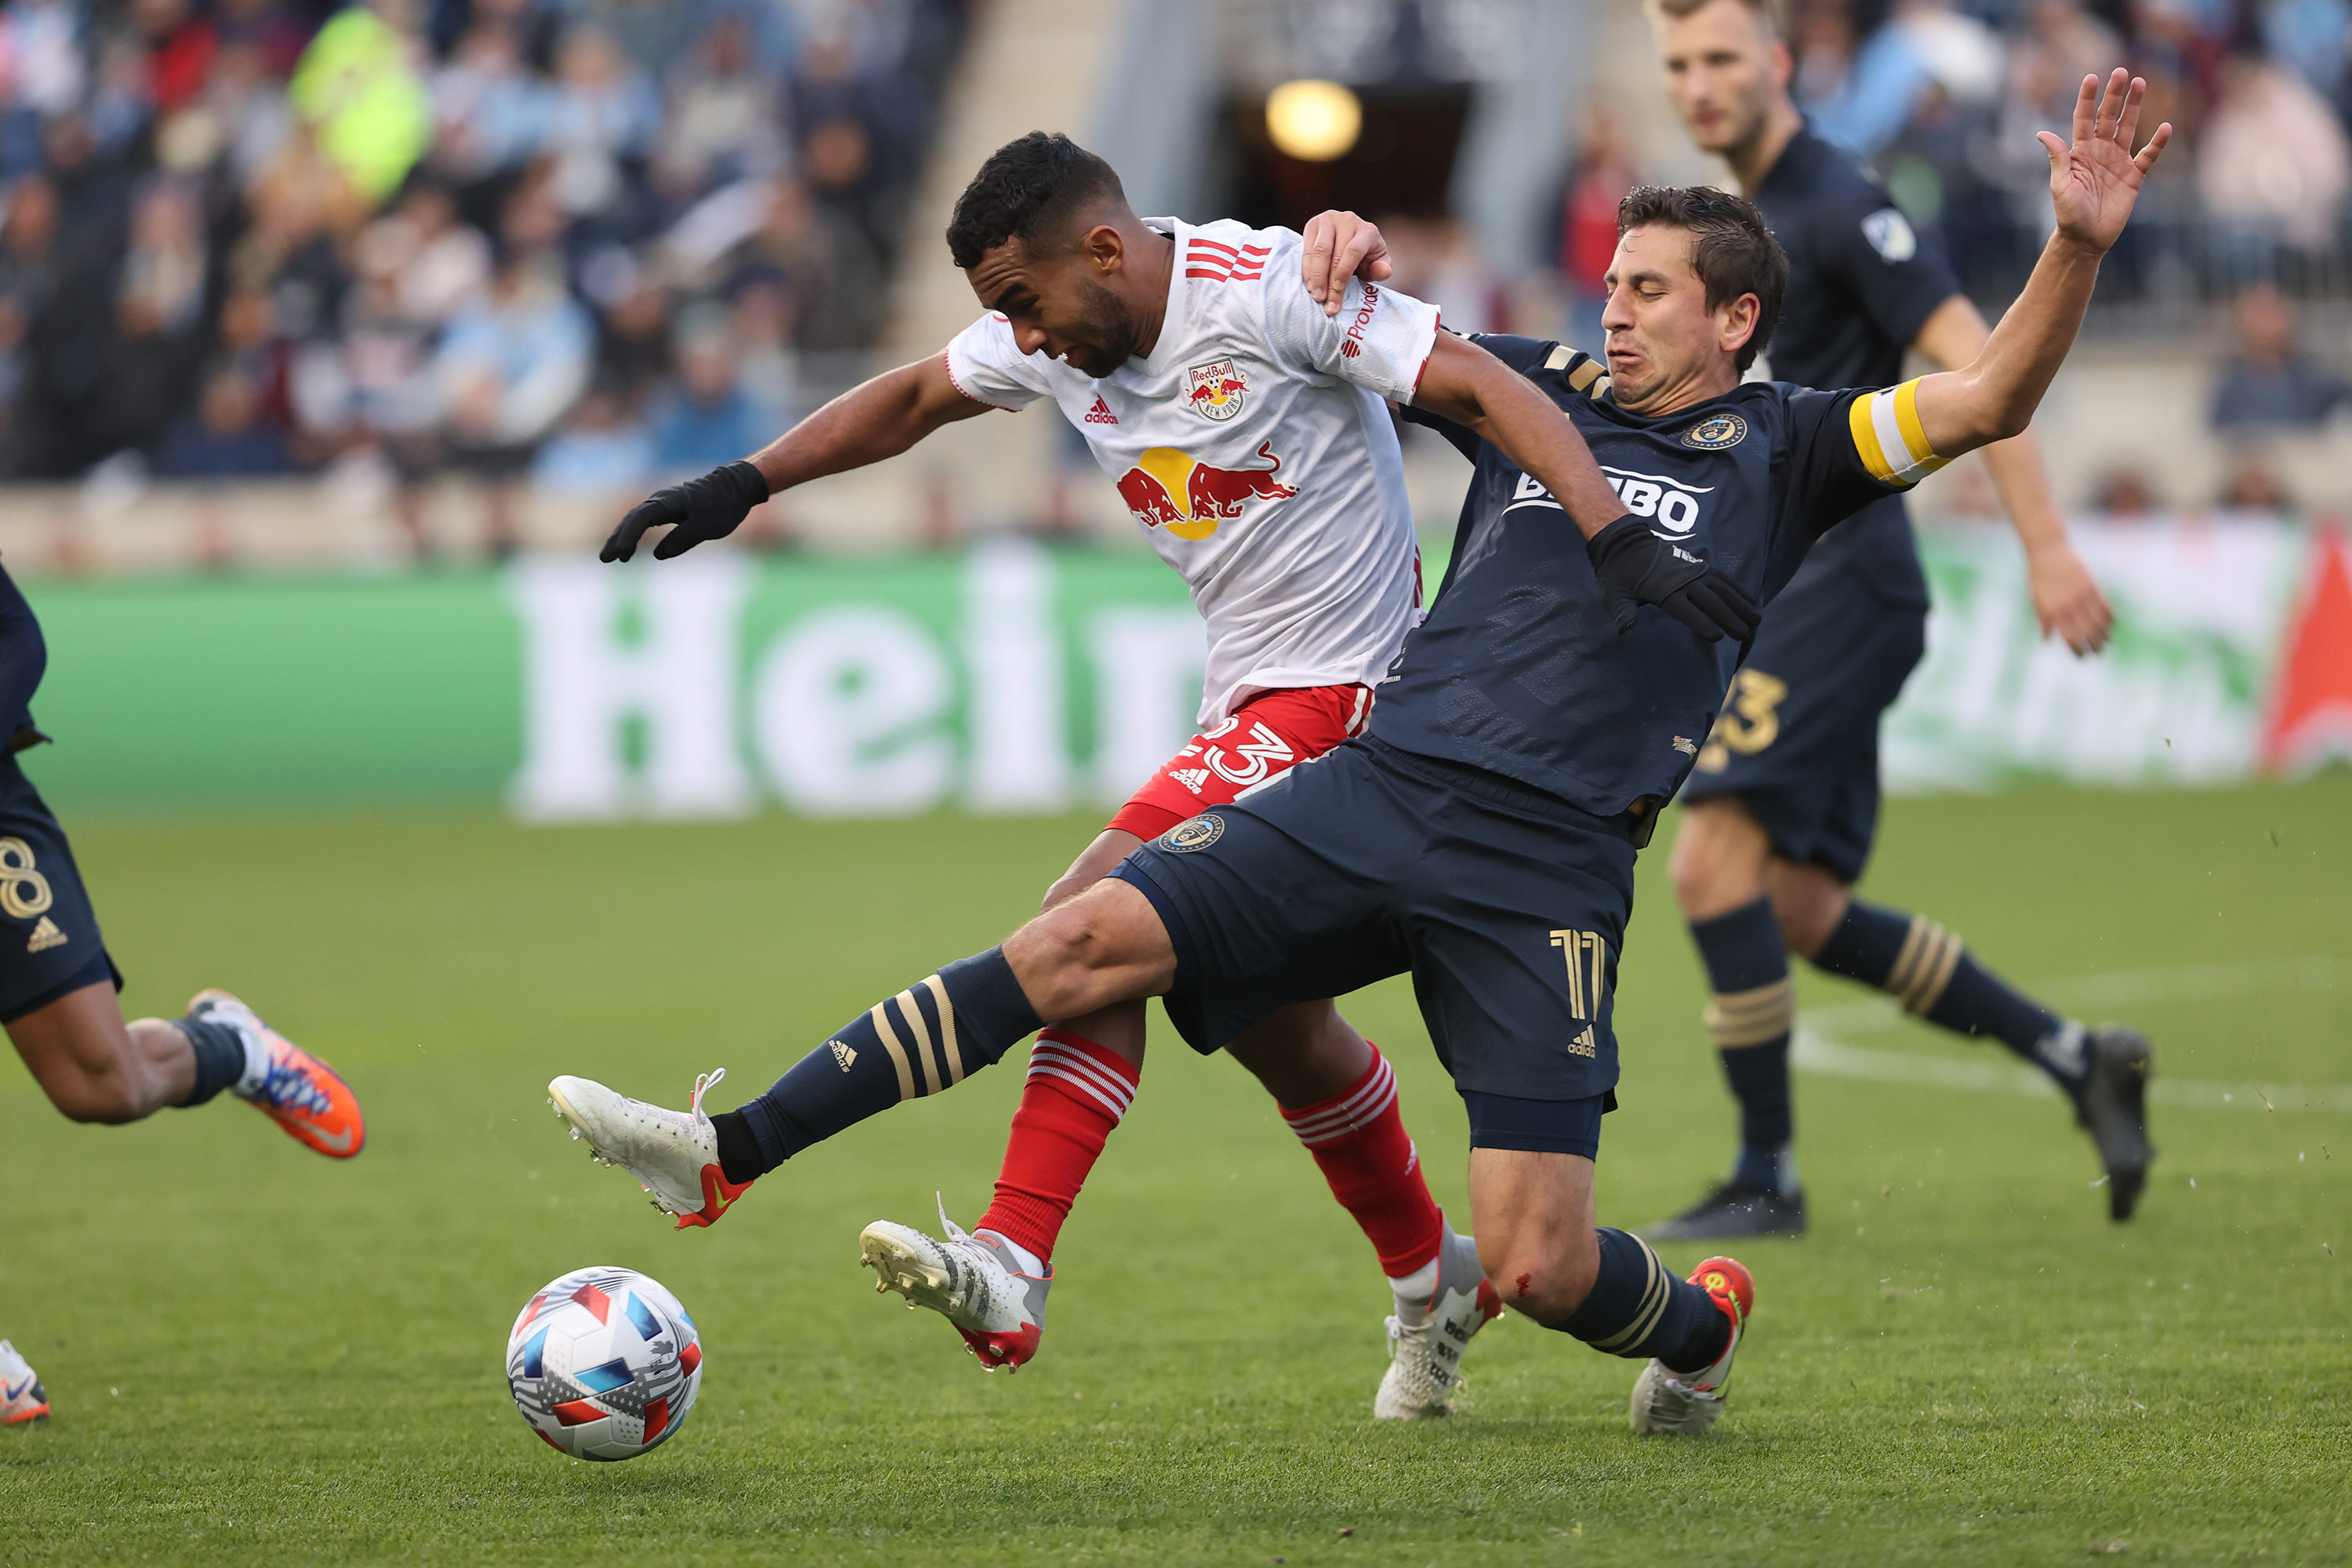 Philadelphia Union place 11 players in MLS health and safety protocols  ahead of playoffs game vs. NYCFC